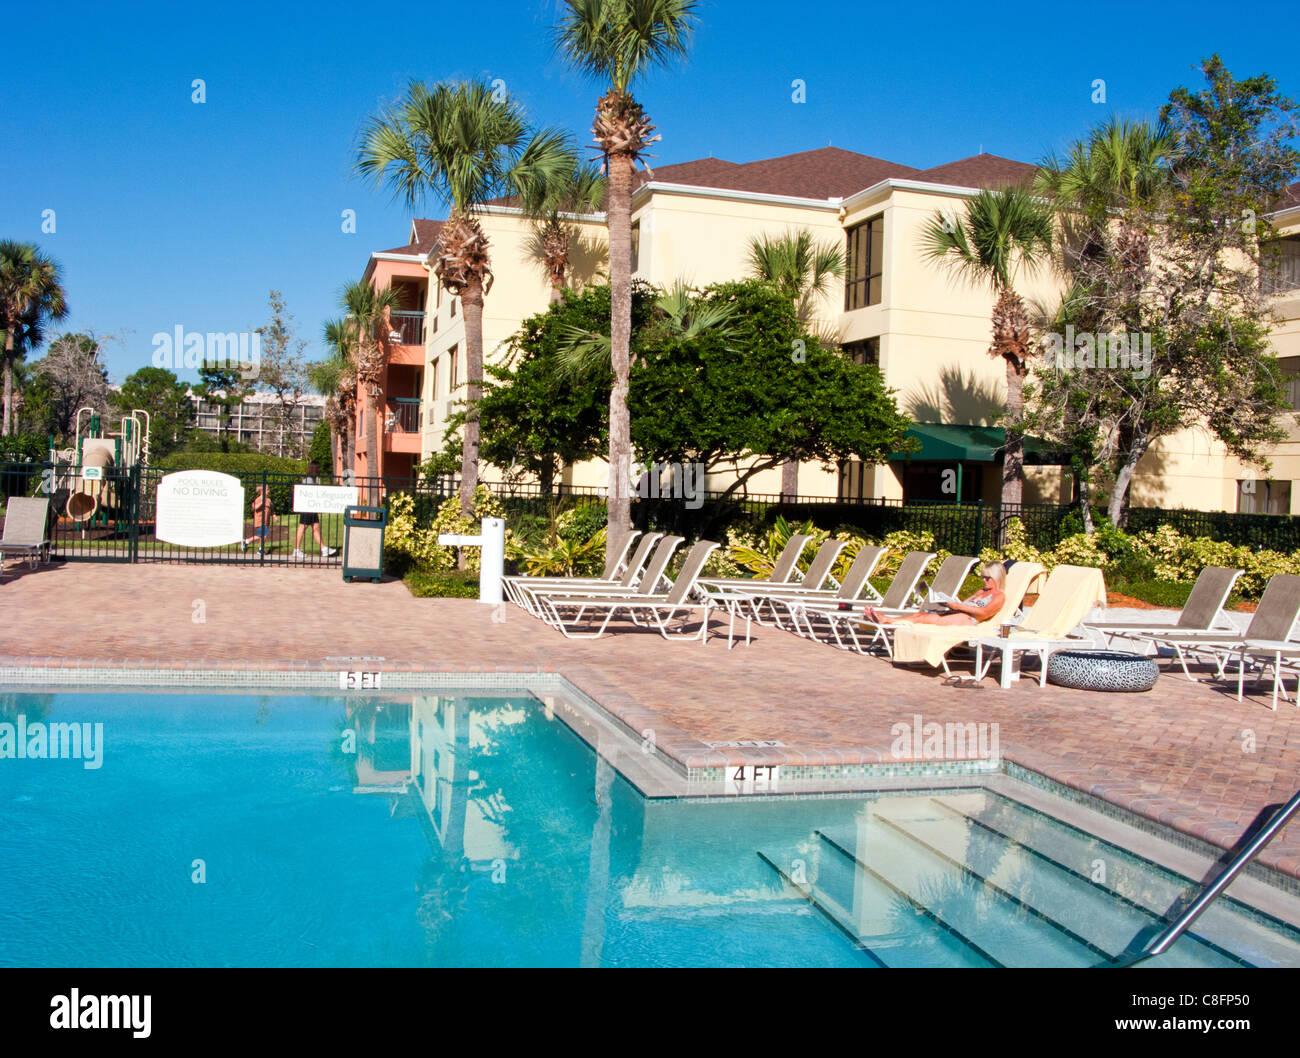 EARLY MORNING SCENE IN A FLORIDA HOTEL Stock Photo